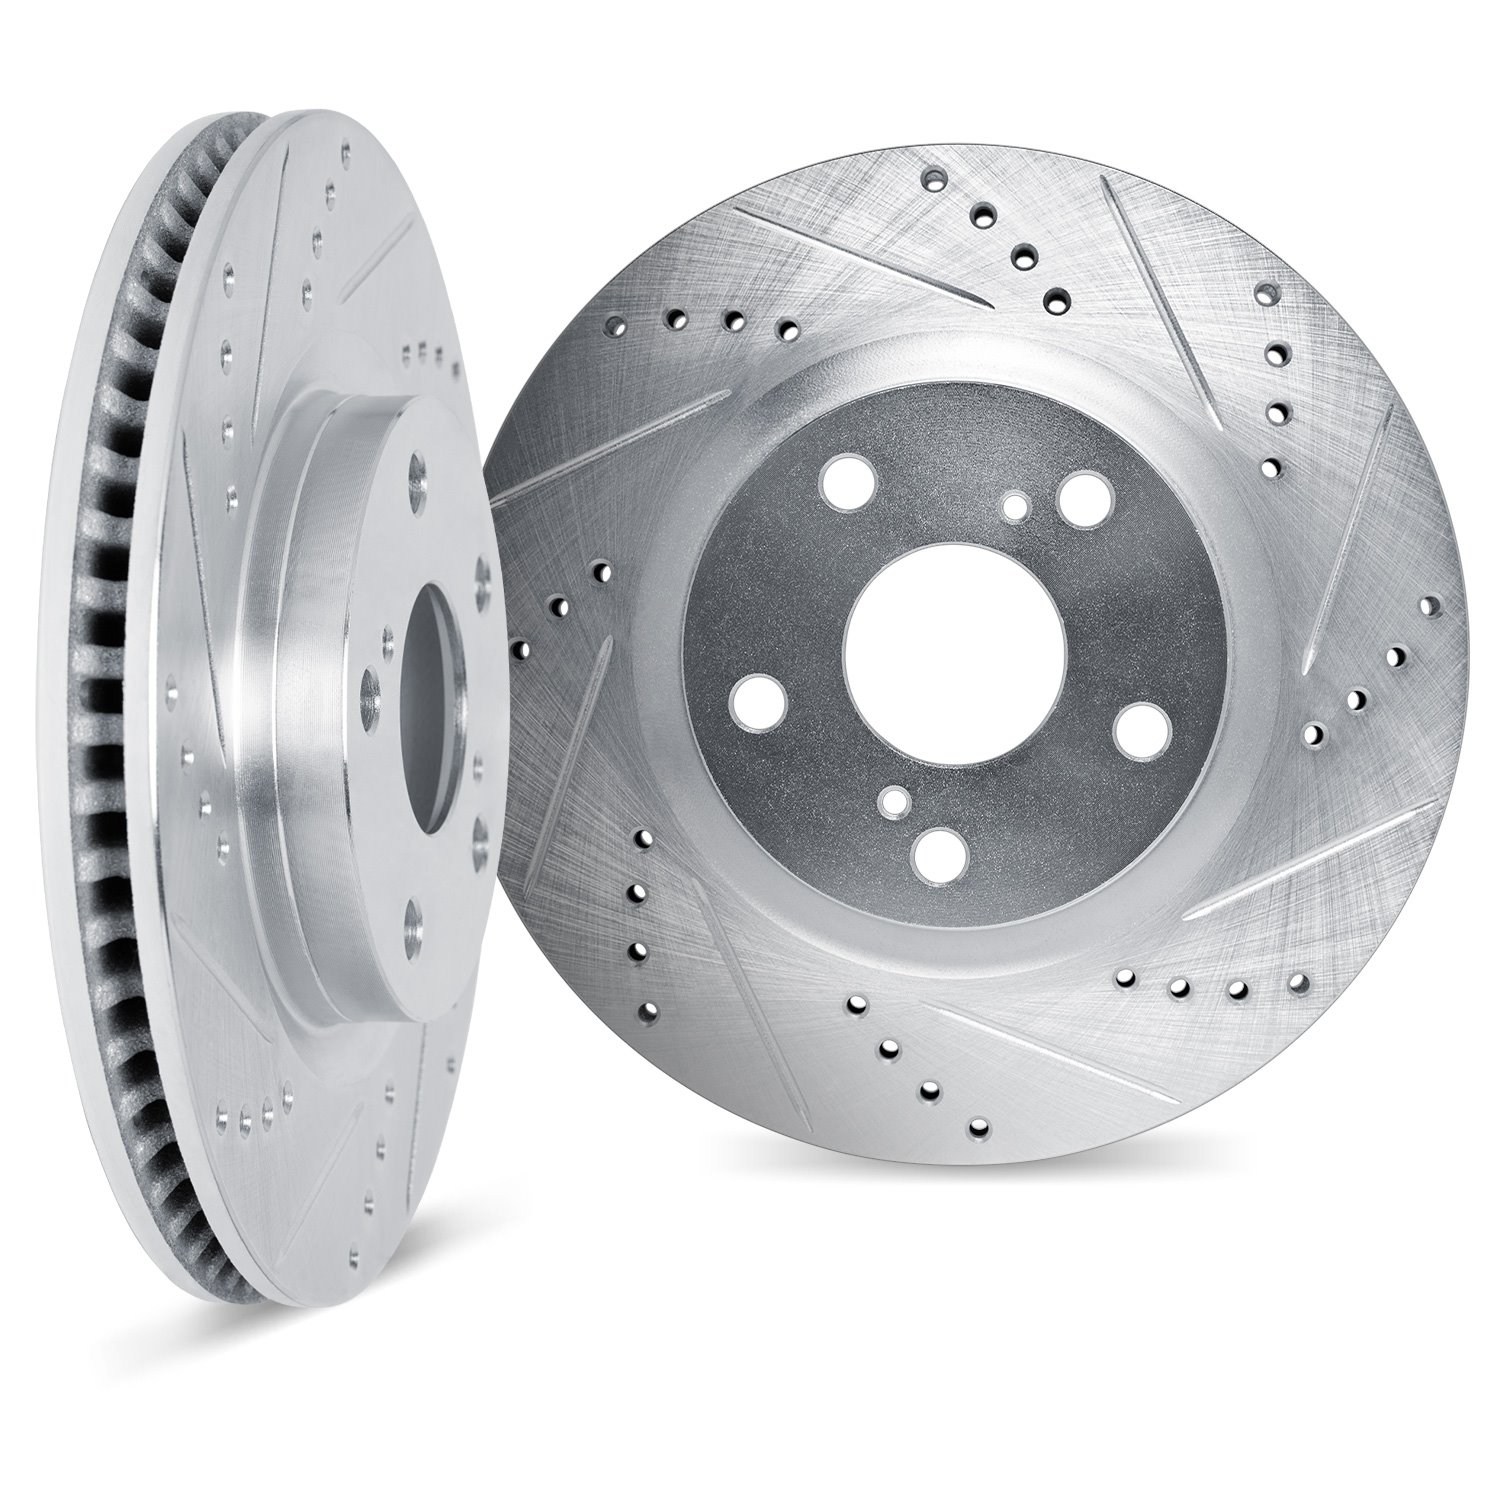 7002-59034 Drilled/Slotted Brake Rotors [Silver], Fits Select Acura/Honda, Position: Front